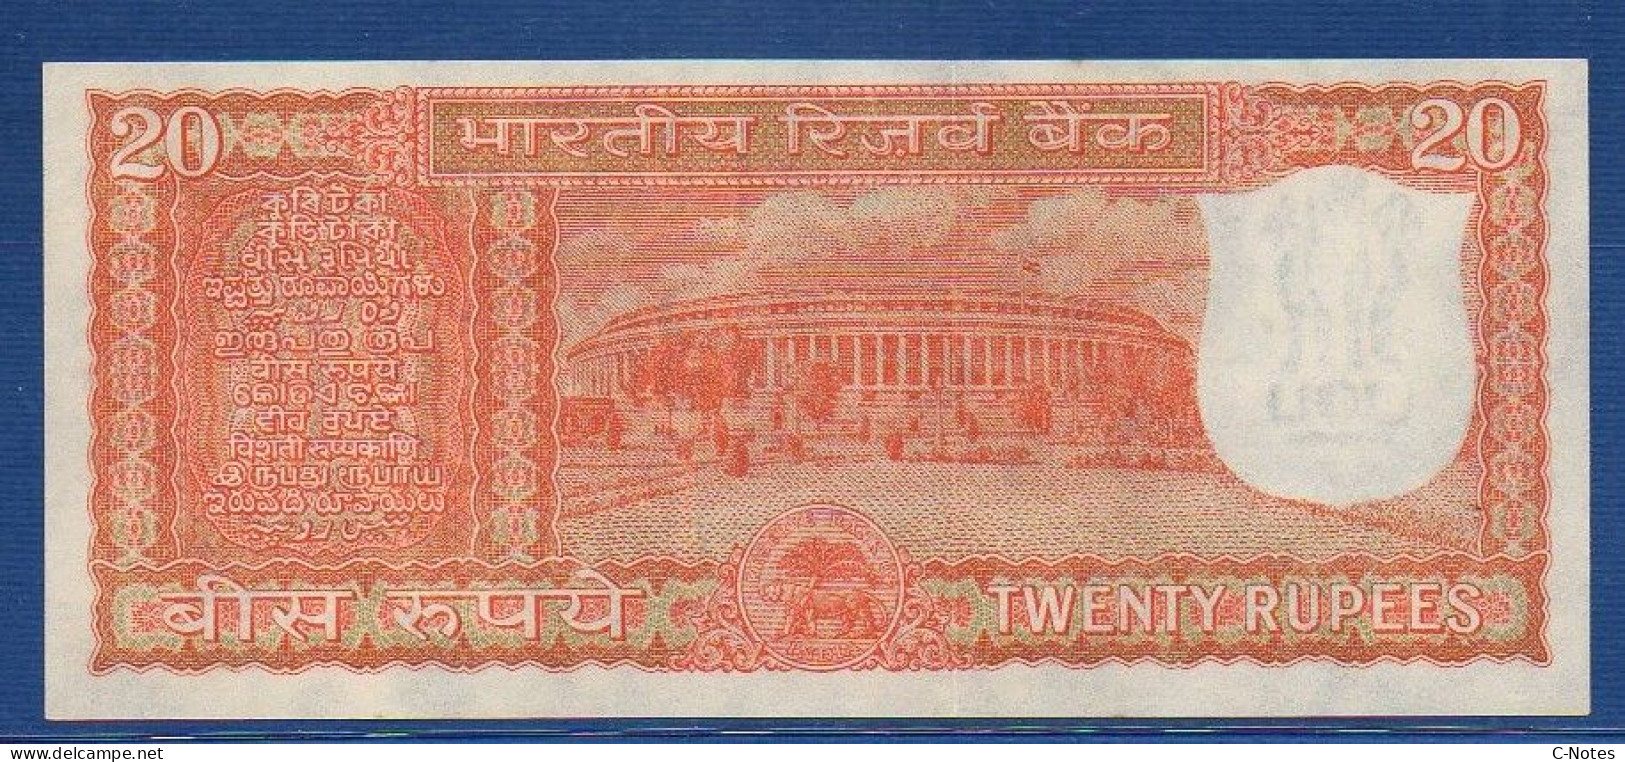 INDIA - P. 61a – 20 Rupees ND, AUNC-,  Serie A43 135290 - Guilloche Under Signature - 	S. Jagannathan (1970) - India